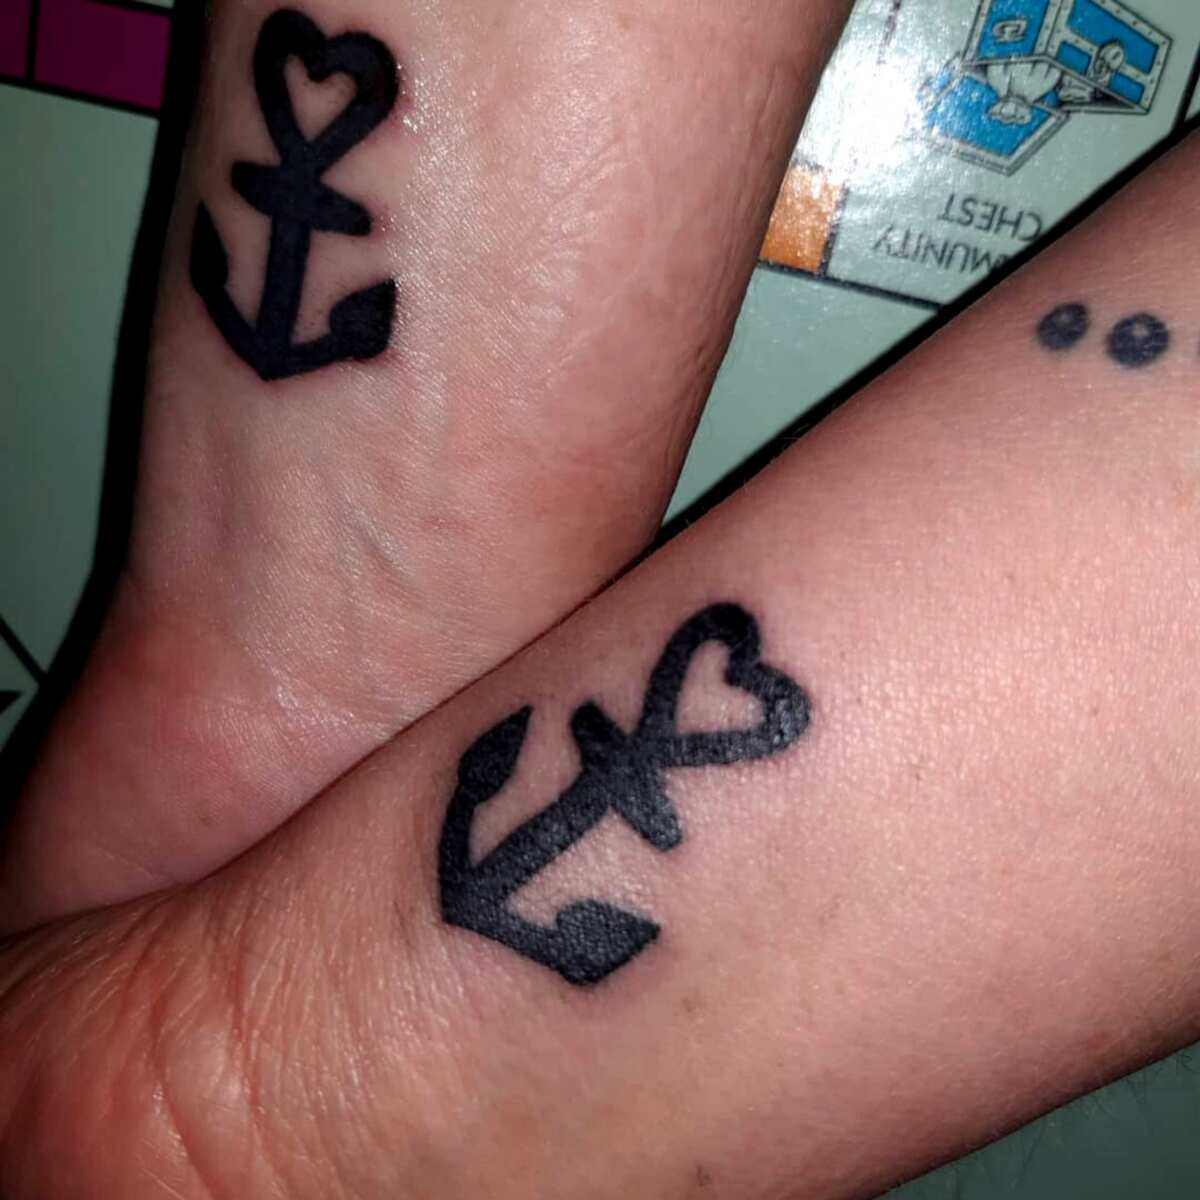 20 Friendship Tattoo Designs To Get With Your BFF